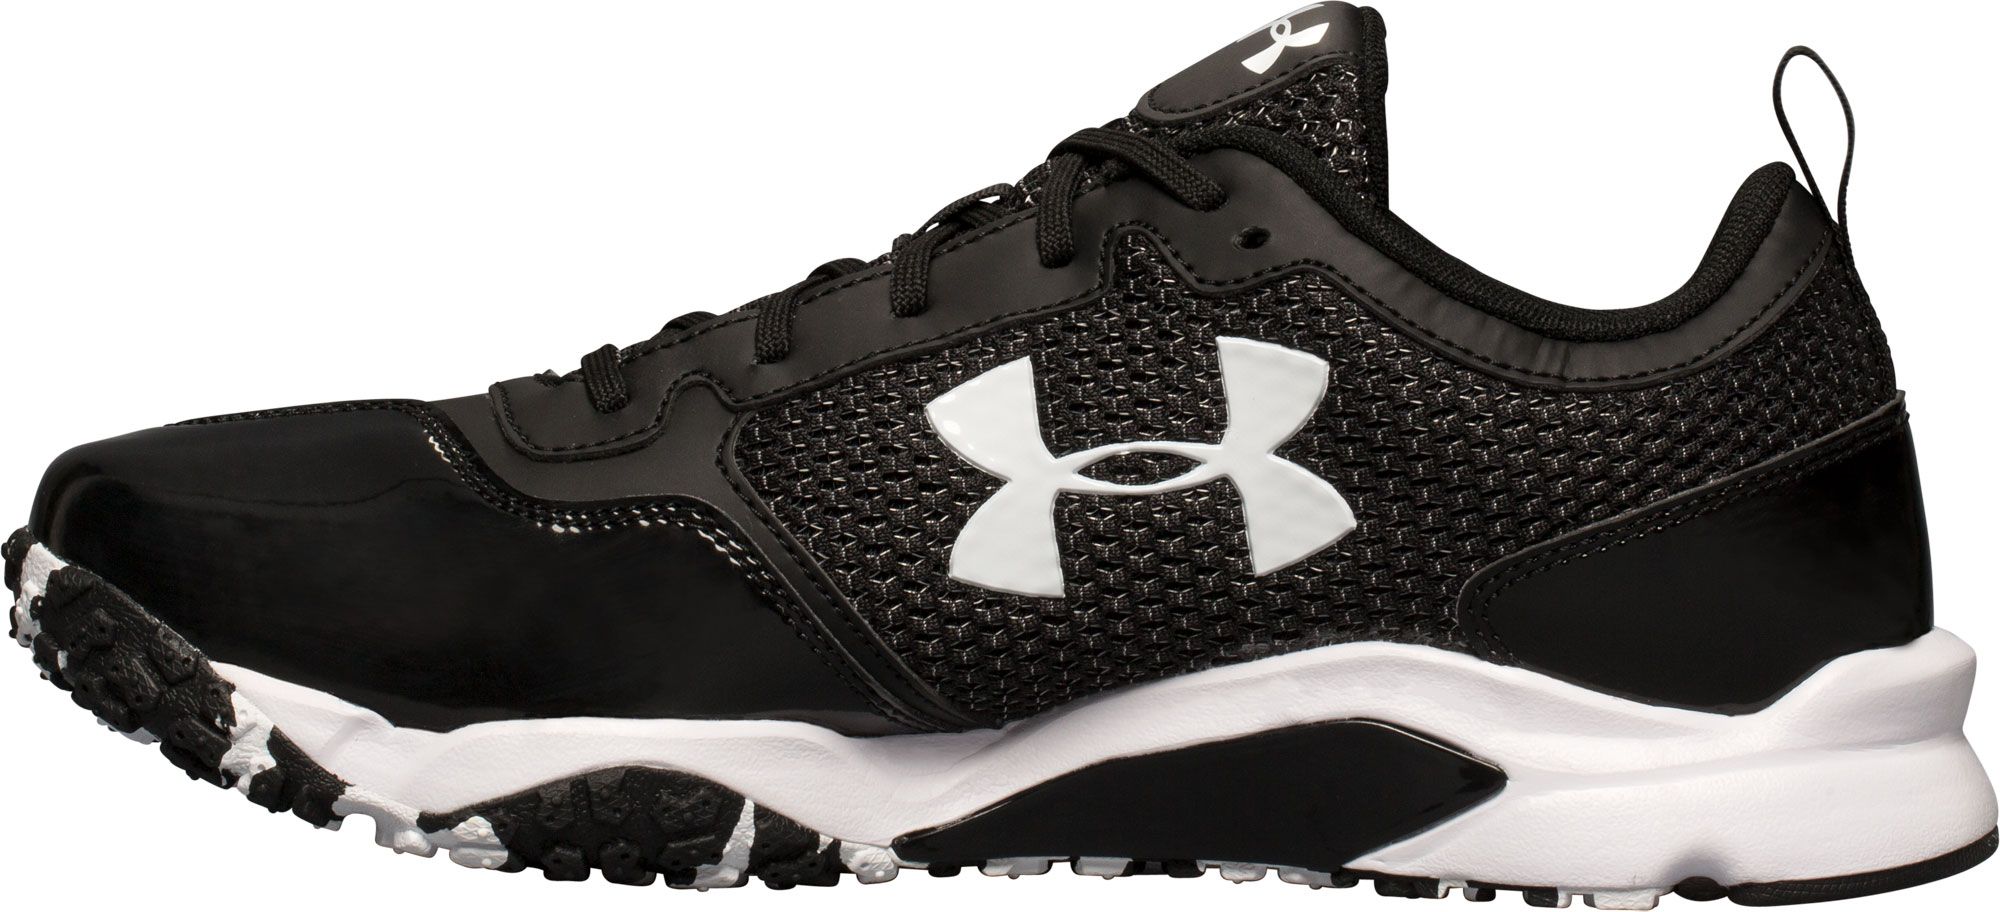 under armour men's ultimate turf trainer